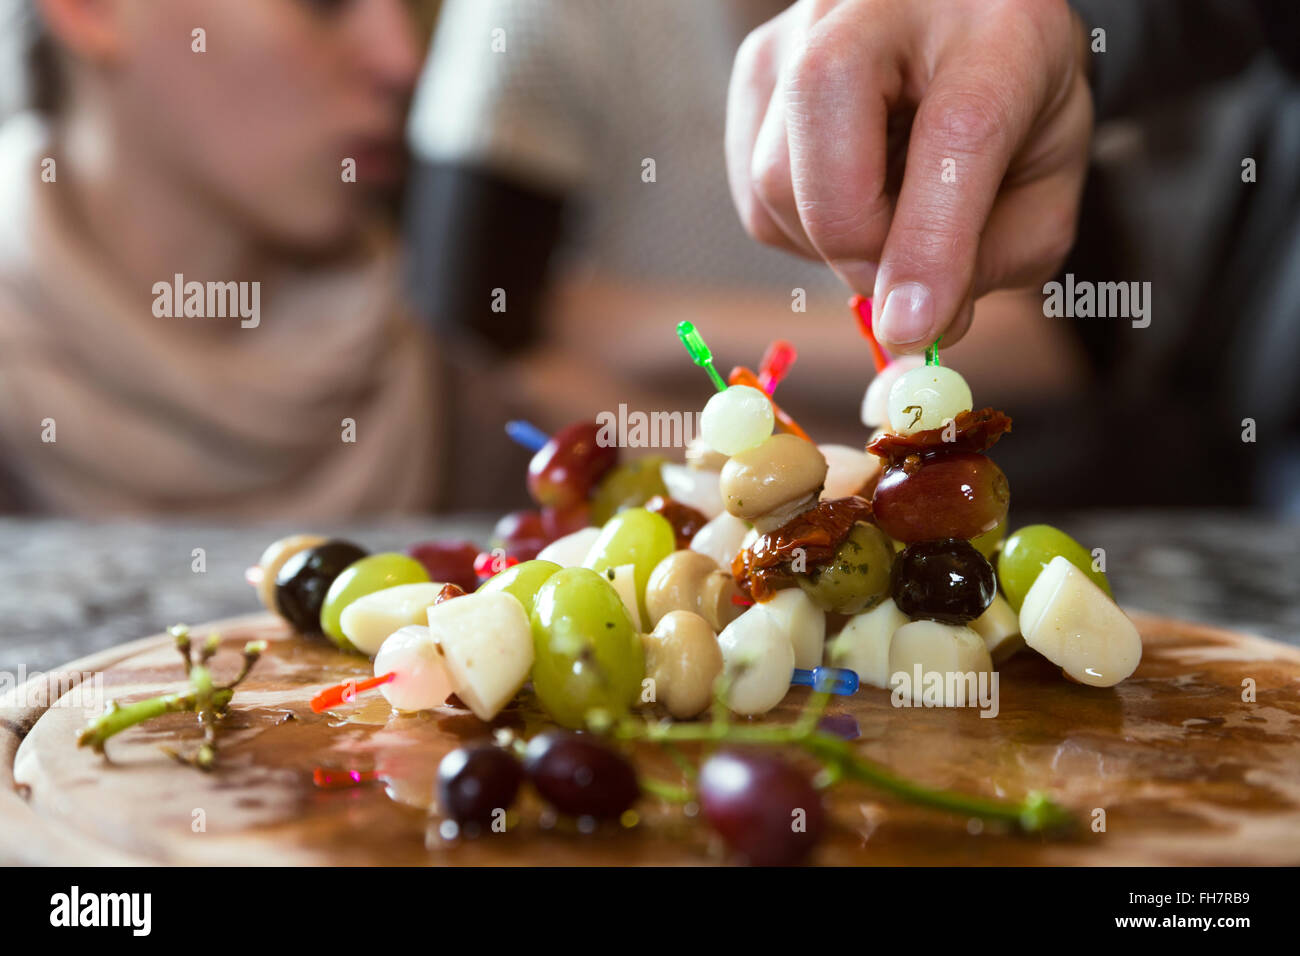 plate with party snacks, group of people in the background Stock Photo